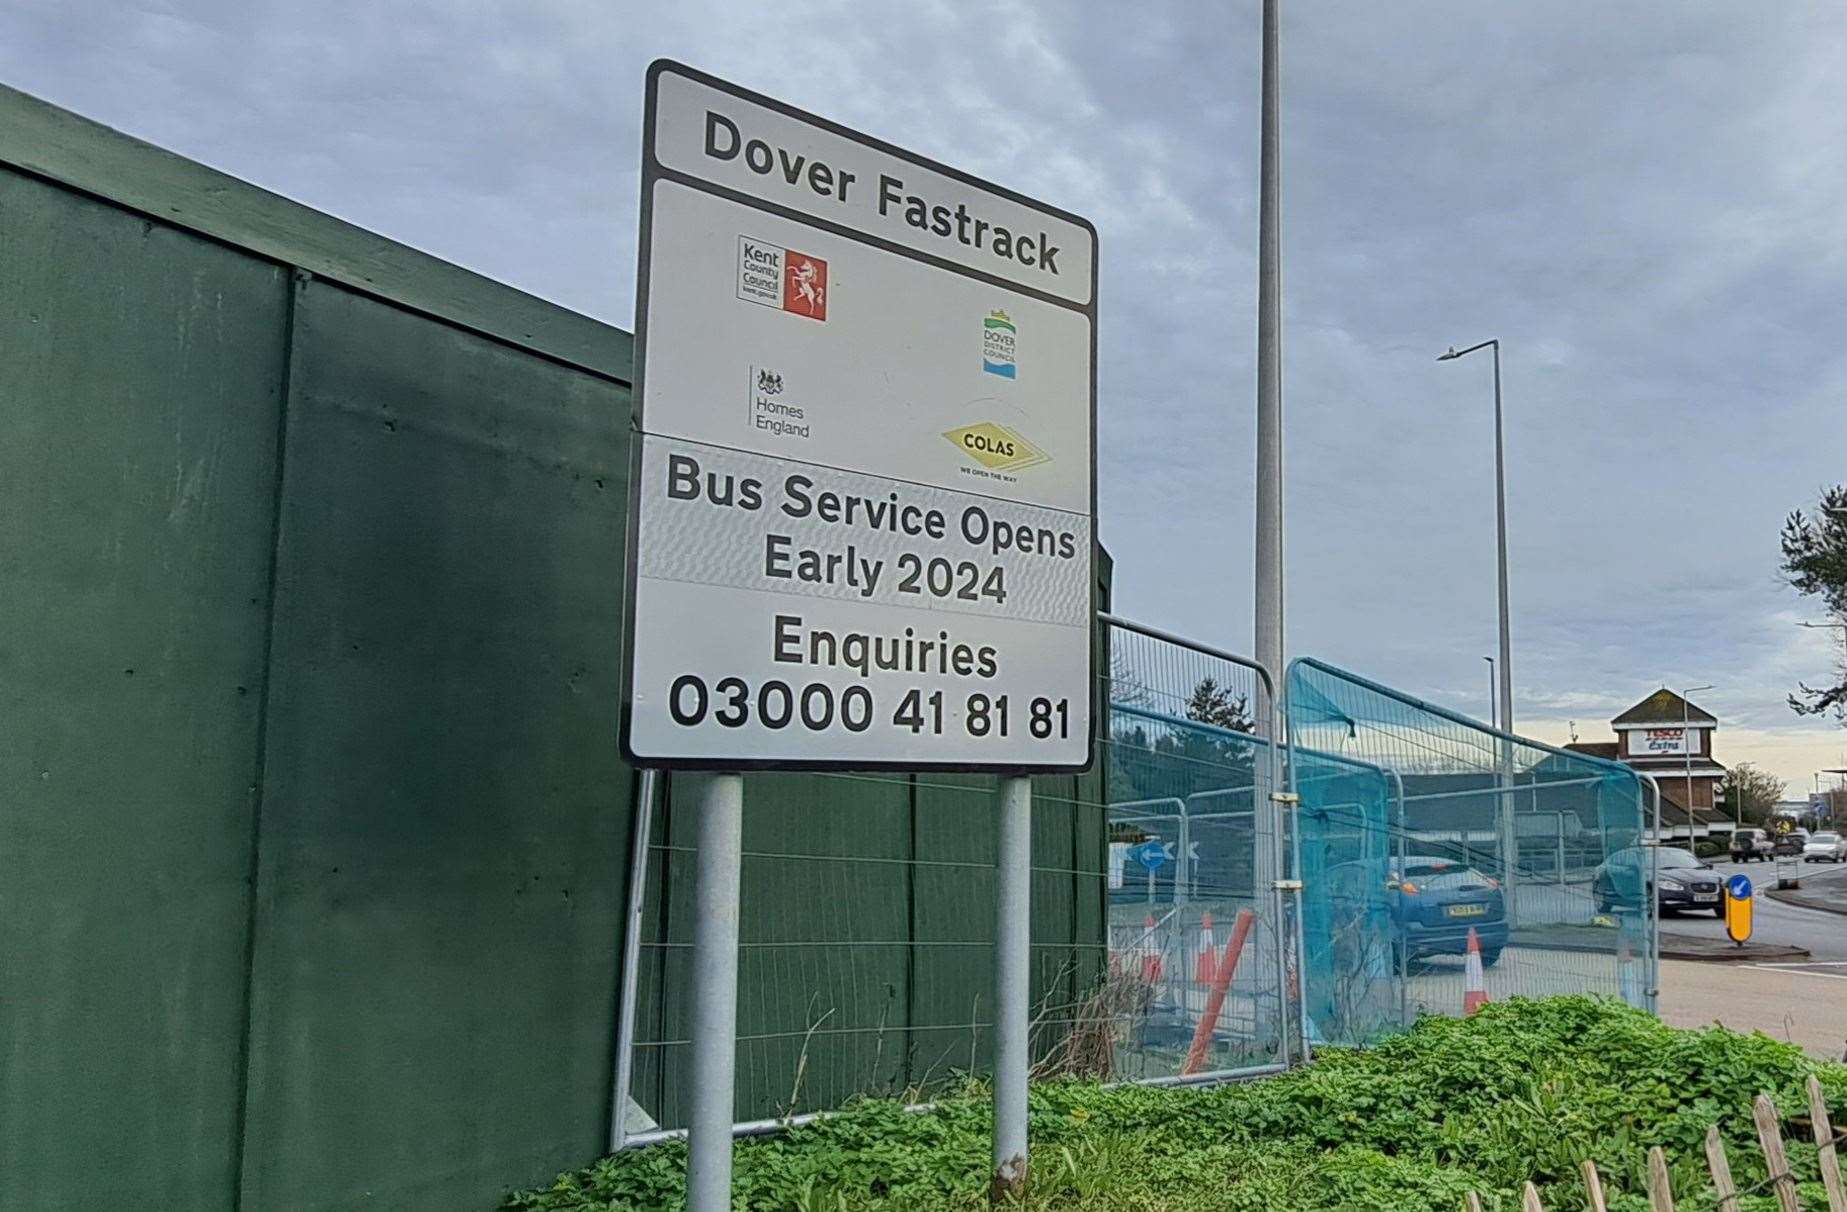 A sign at the Tesco roundabout in Whitfield says the Fastrack route will open in “early 2024”